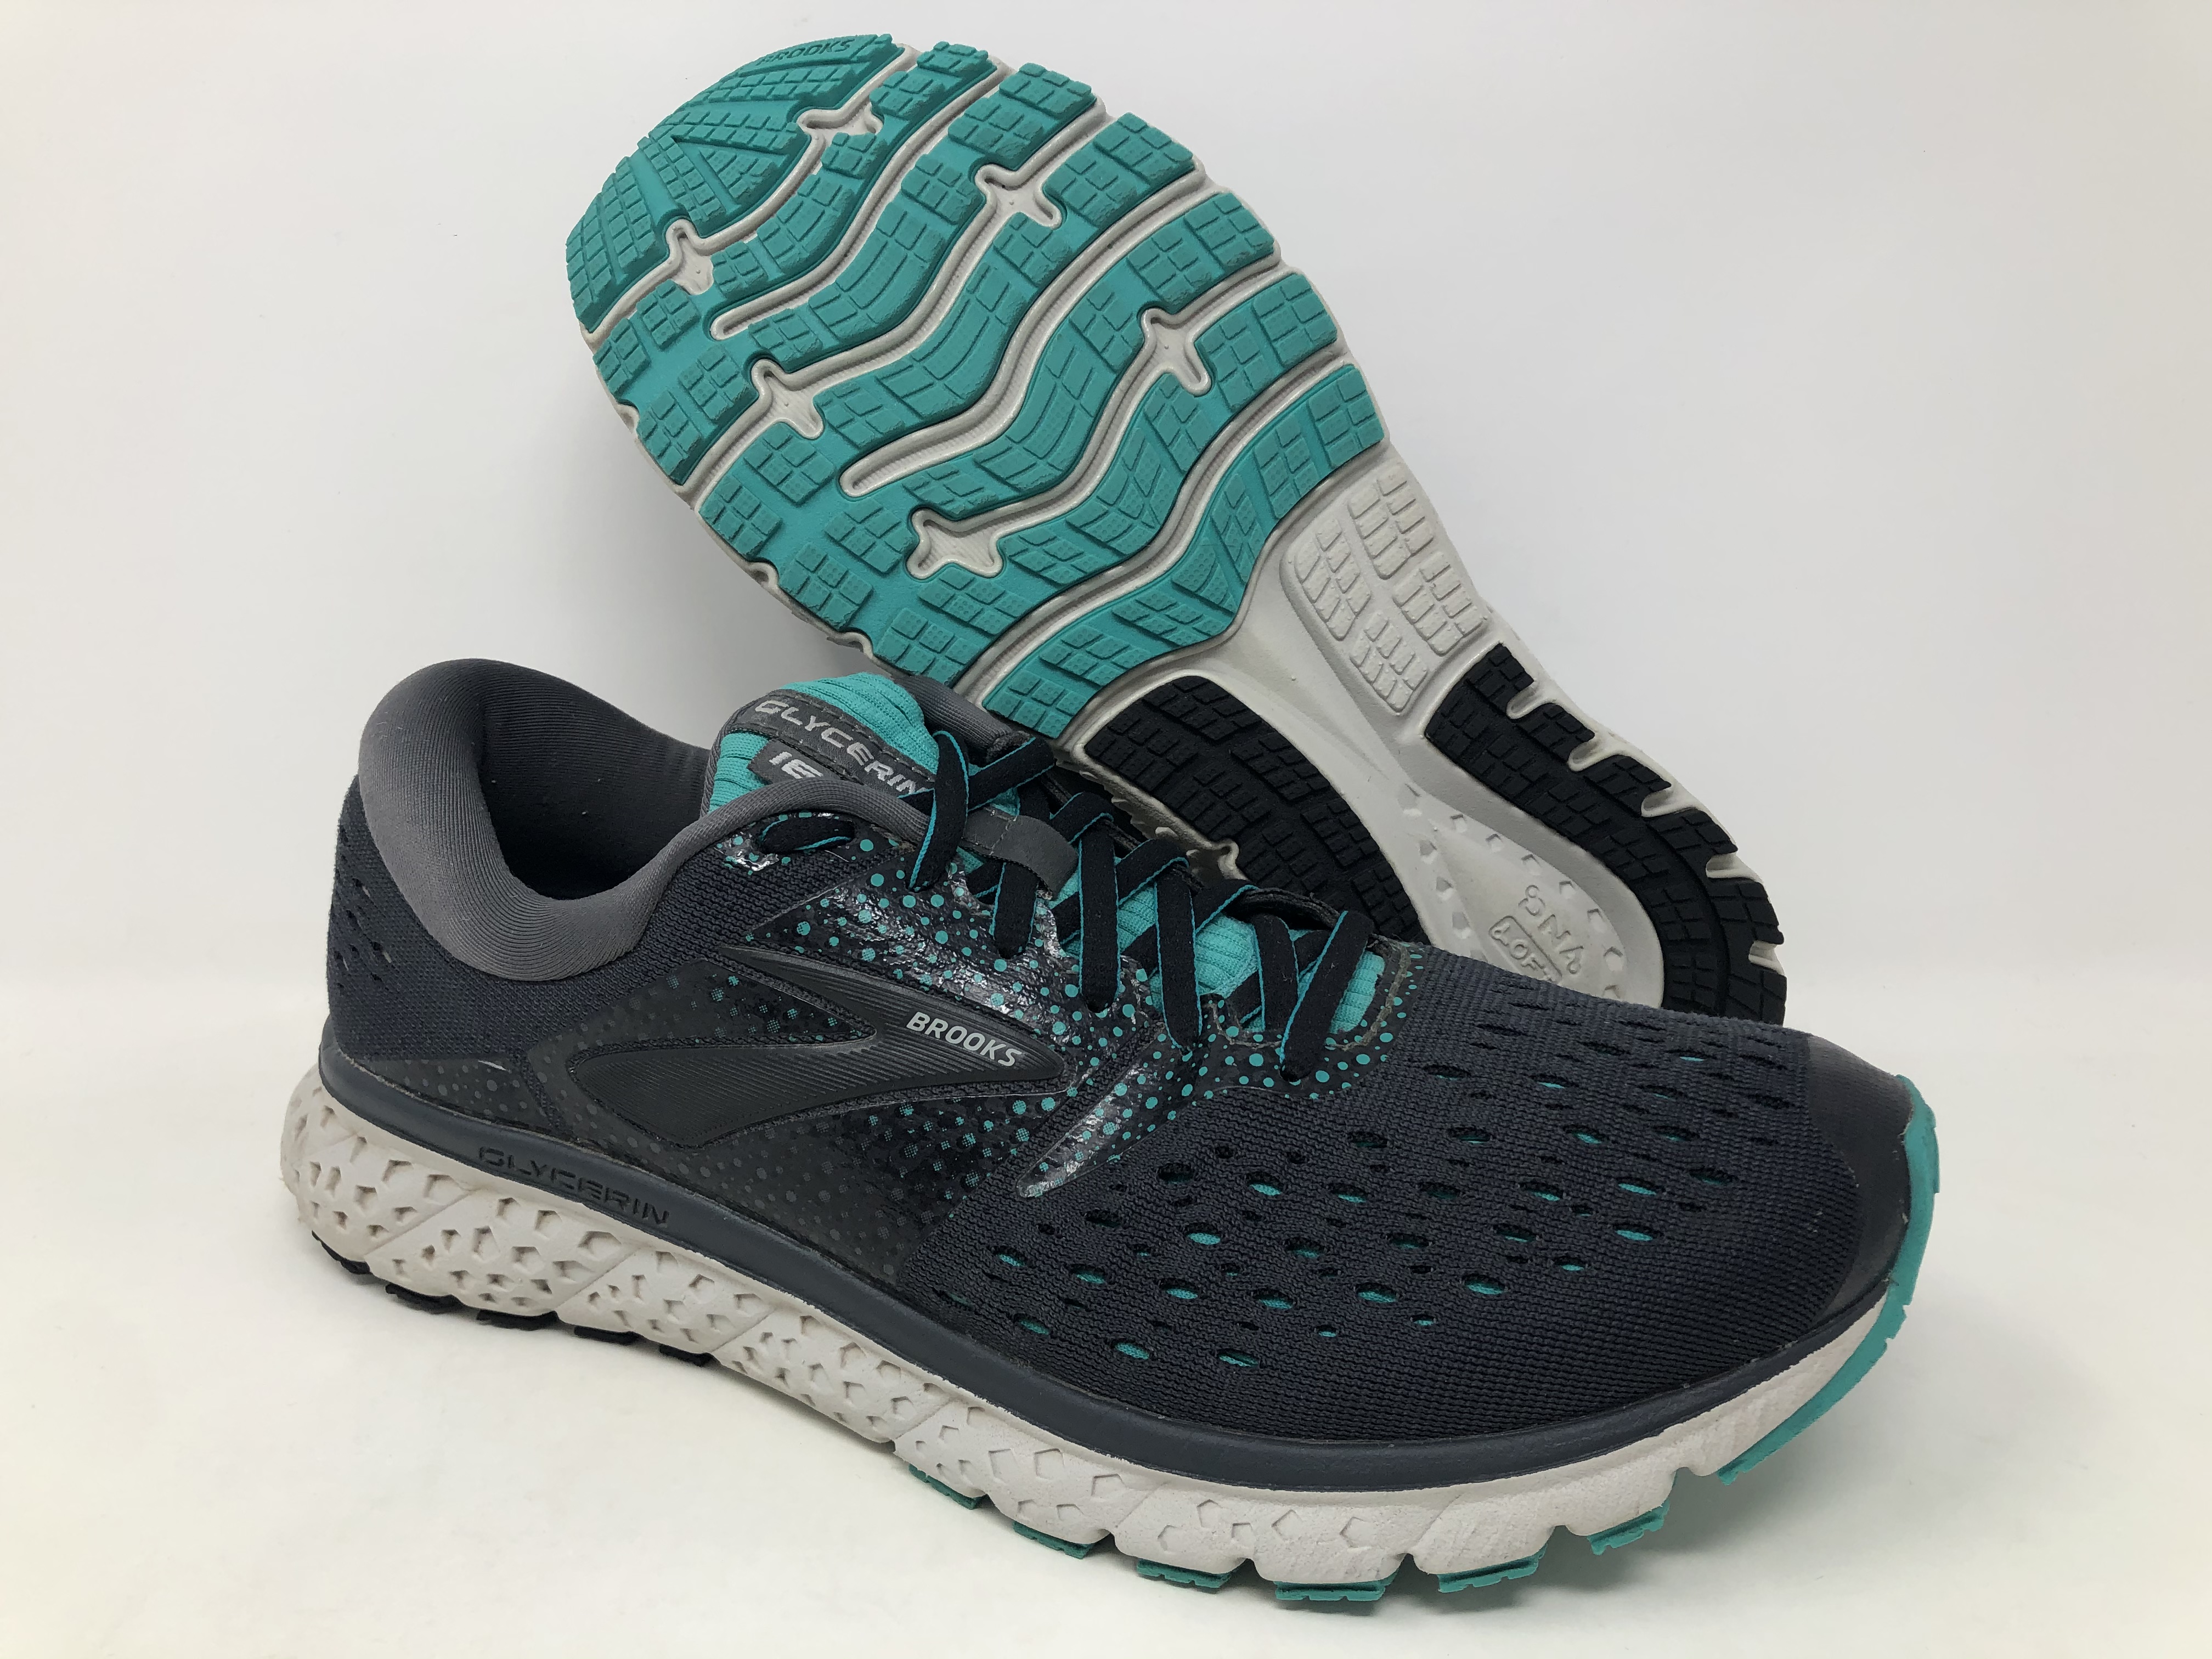 84 Casual Brooks shoes glycerin 9 for Trend in 2022